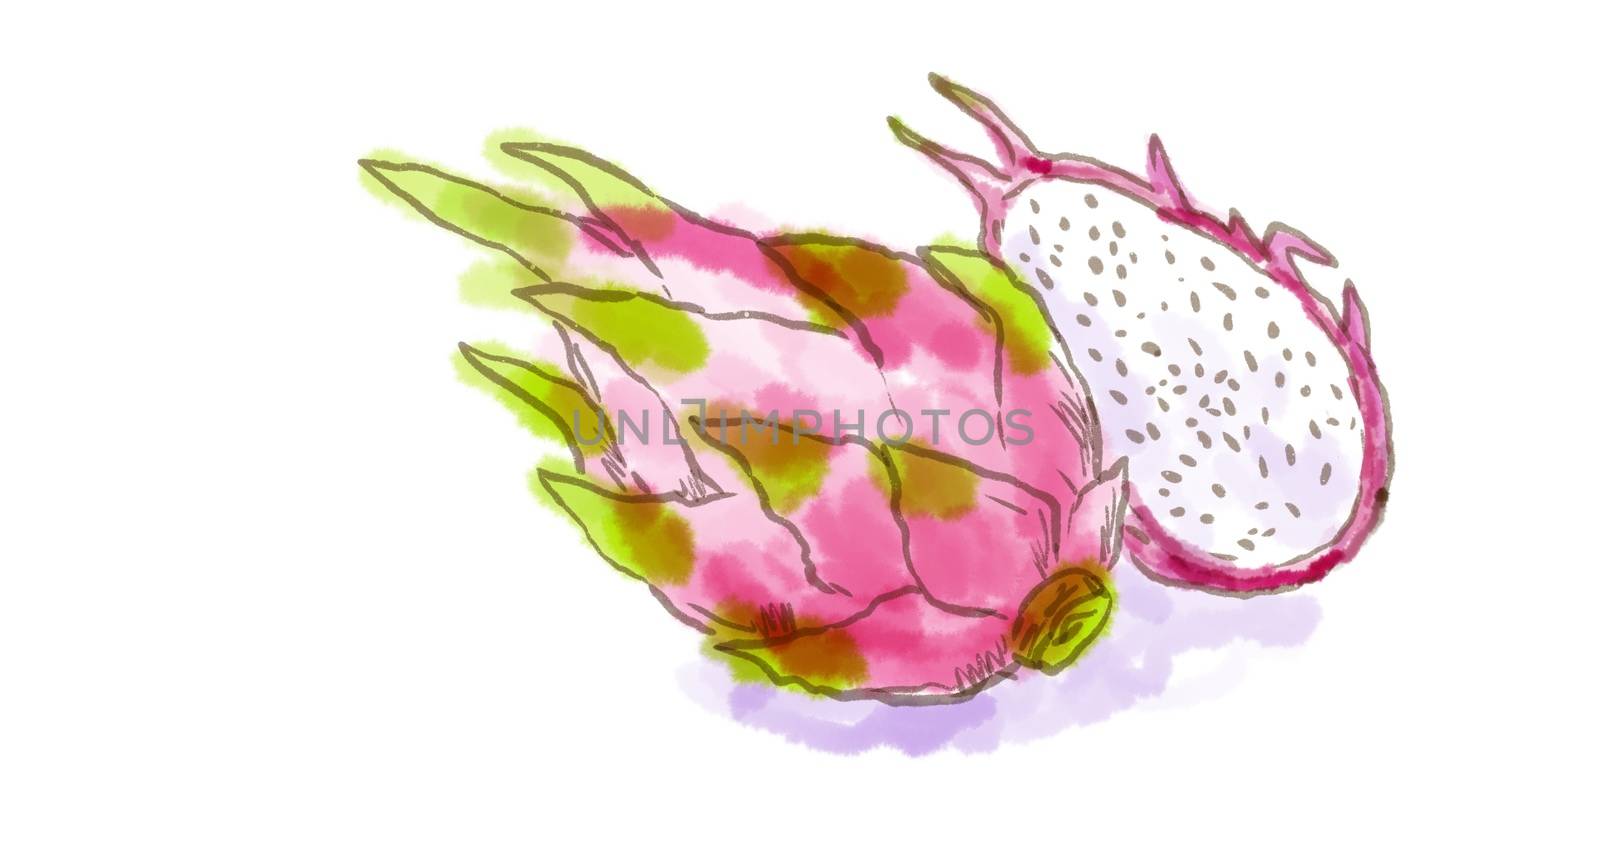 Watercolor drawing of a pitahaya or dragon fruit of the genus Hylocereus, both in the family Cactaceae on white.